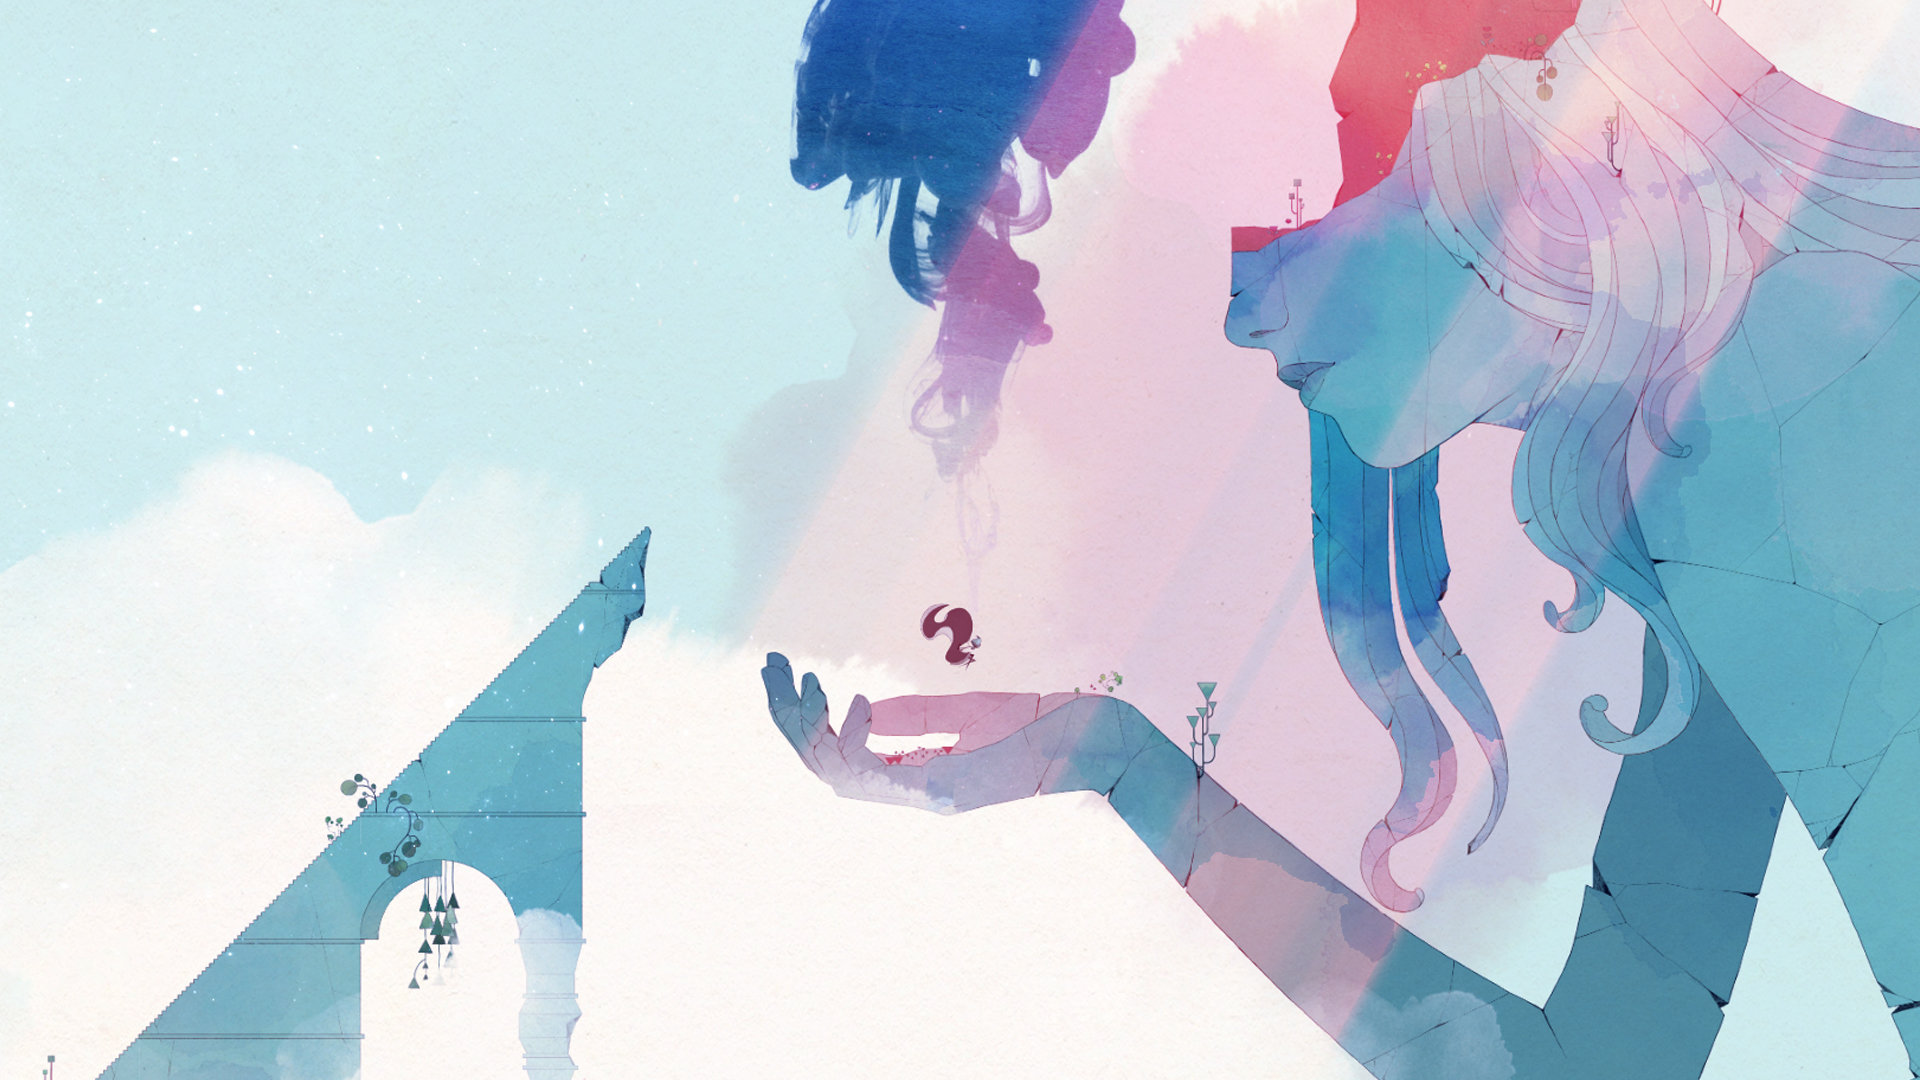 The hero held up by a beautiful statue in Gris